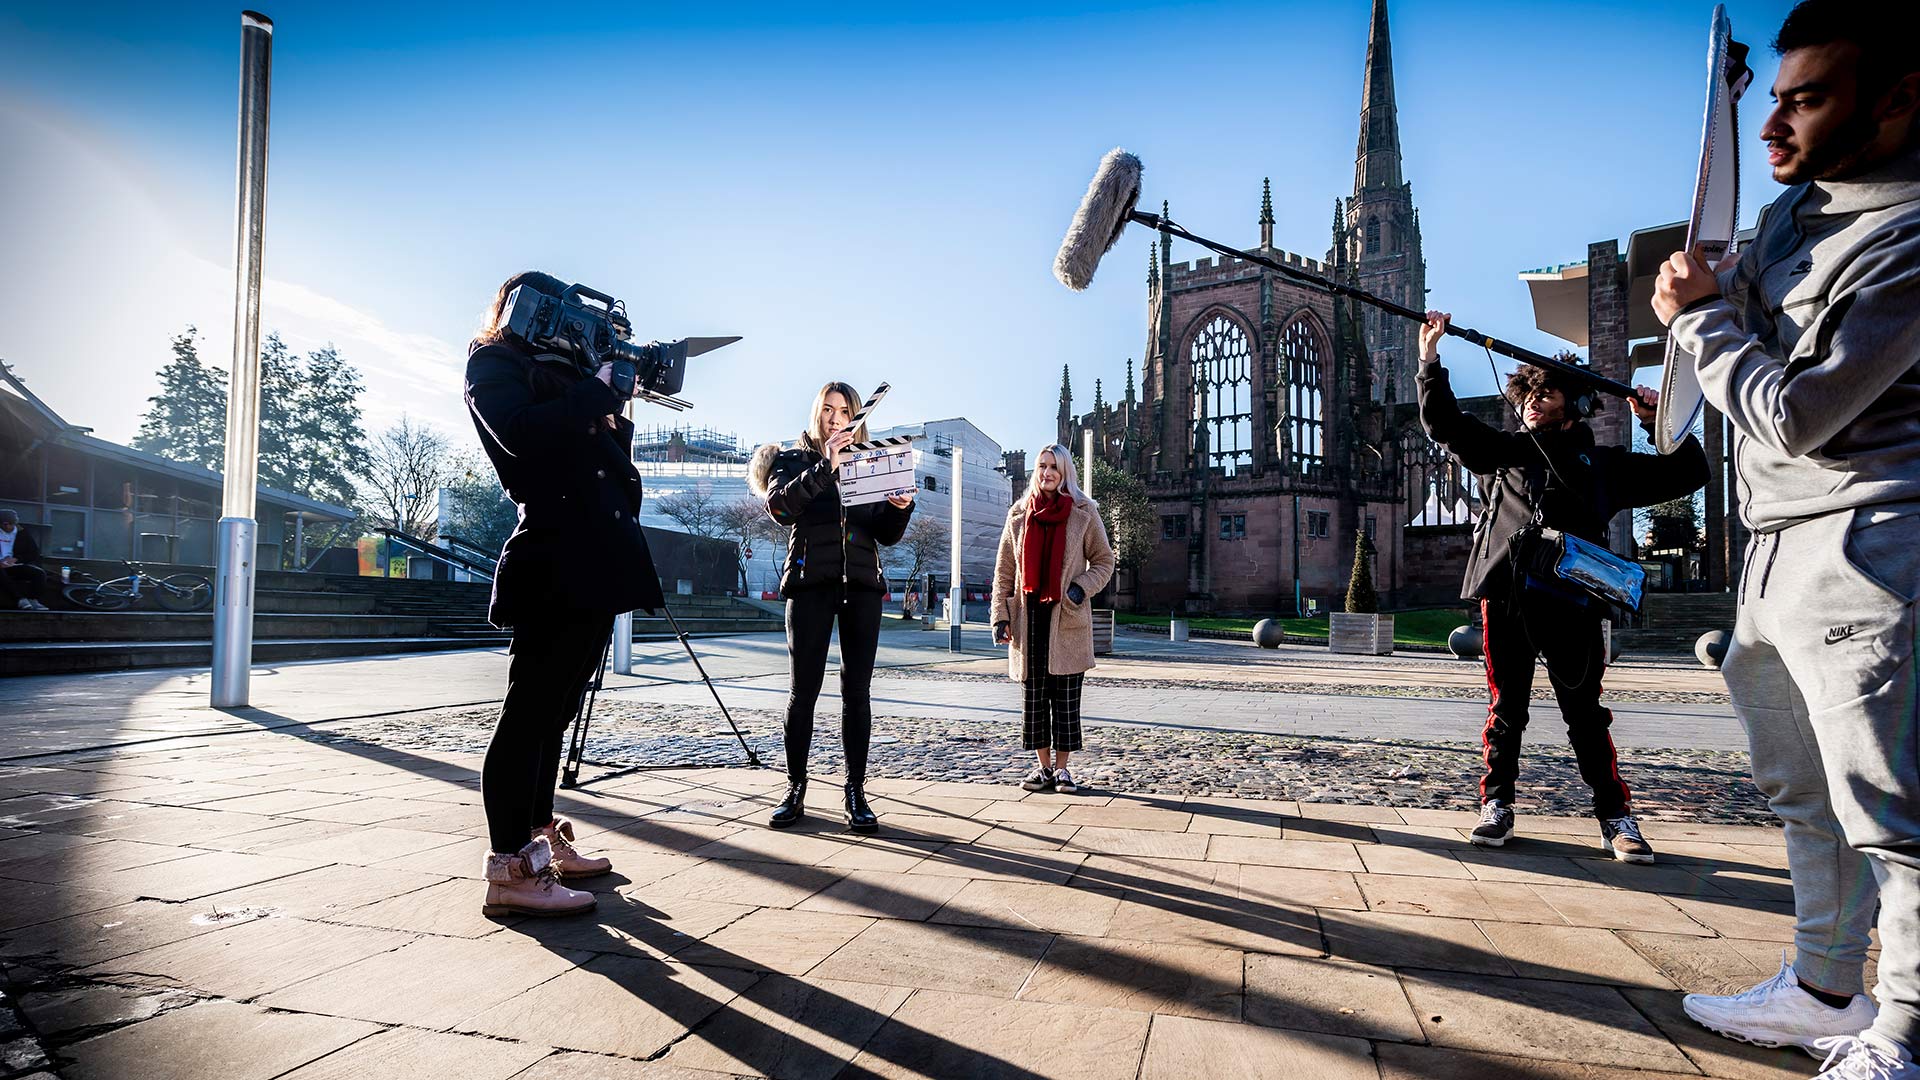 Media Production student with a clapperboard and two students in the background with filming equipment